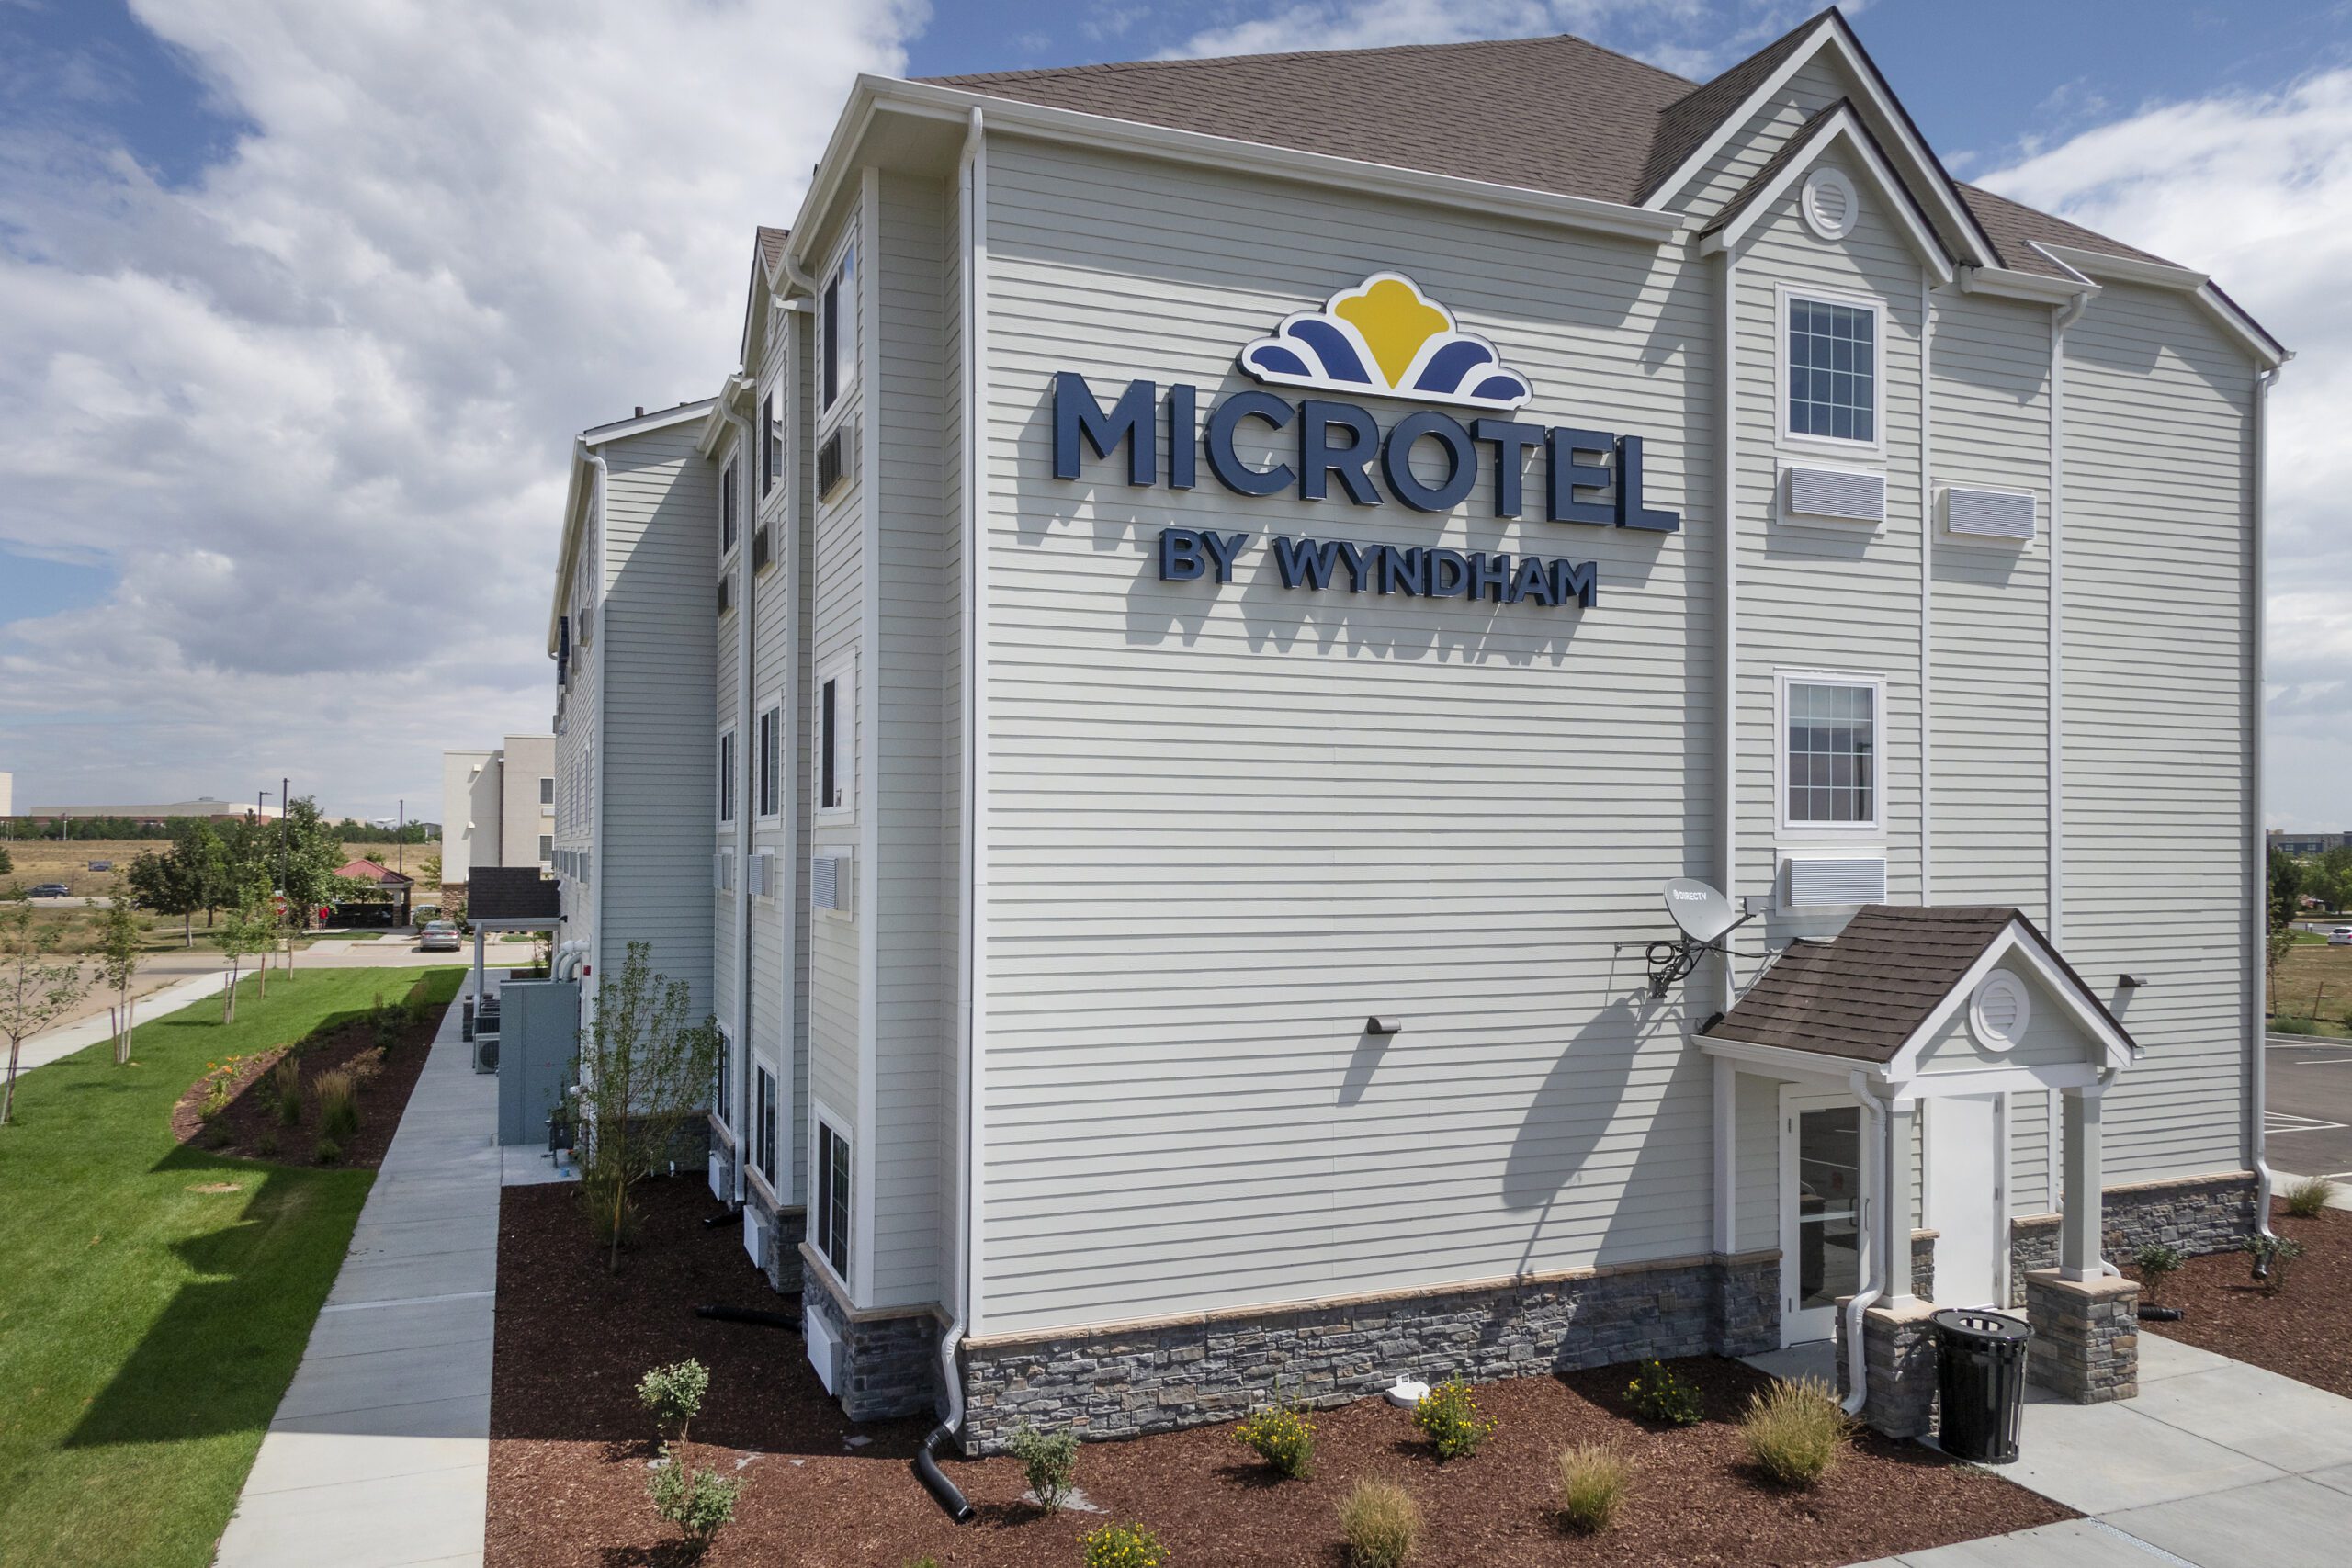 Exterior of Microtel by Wyndham in Loveland, CO.